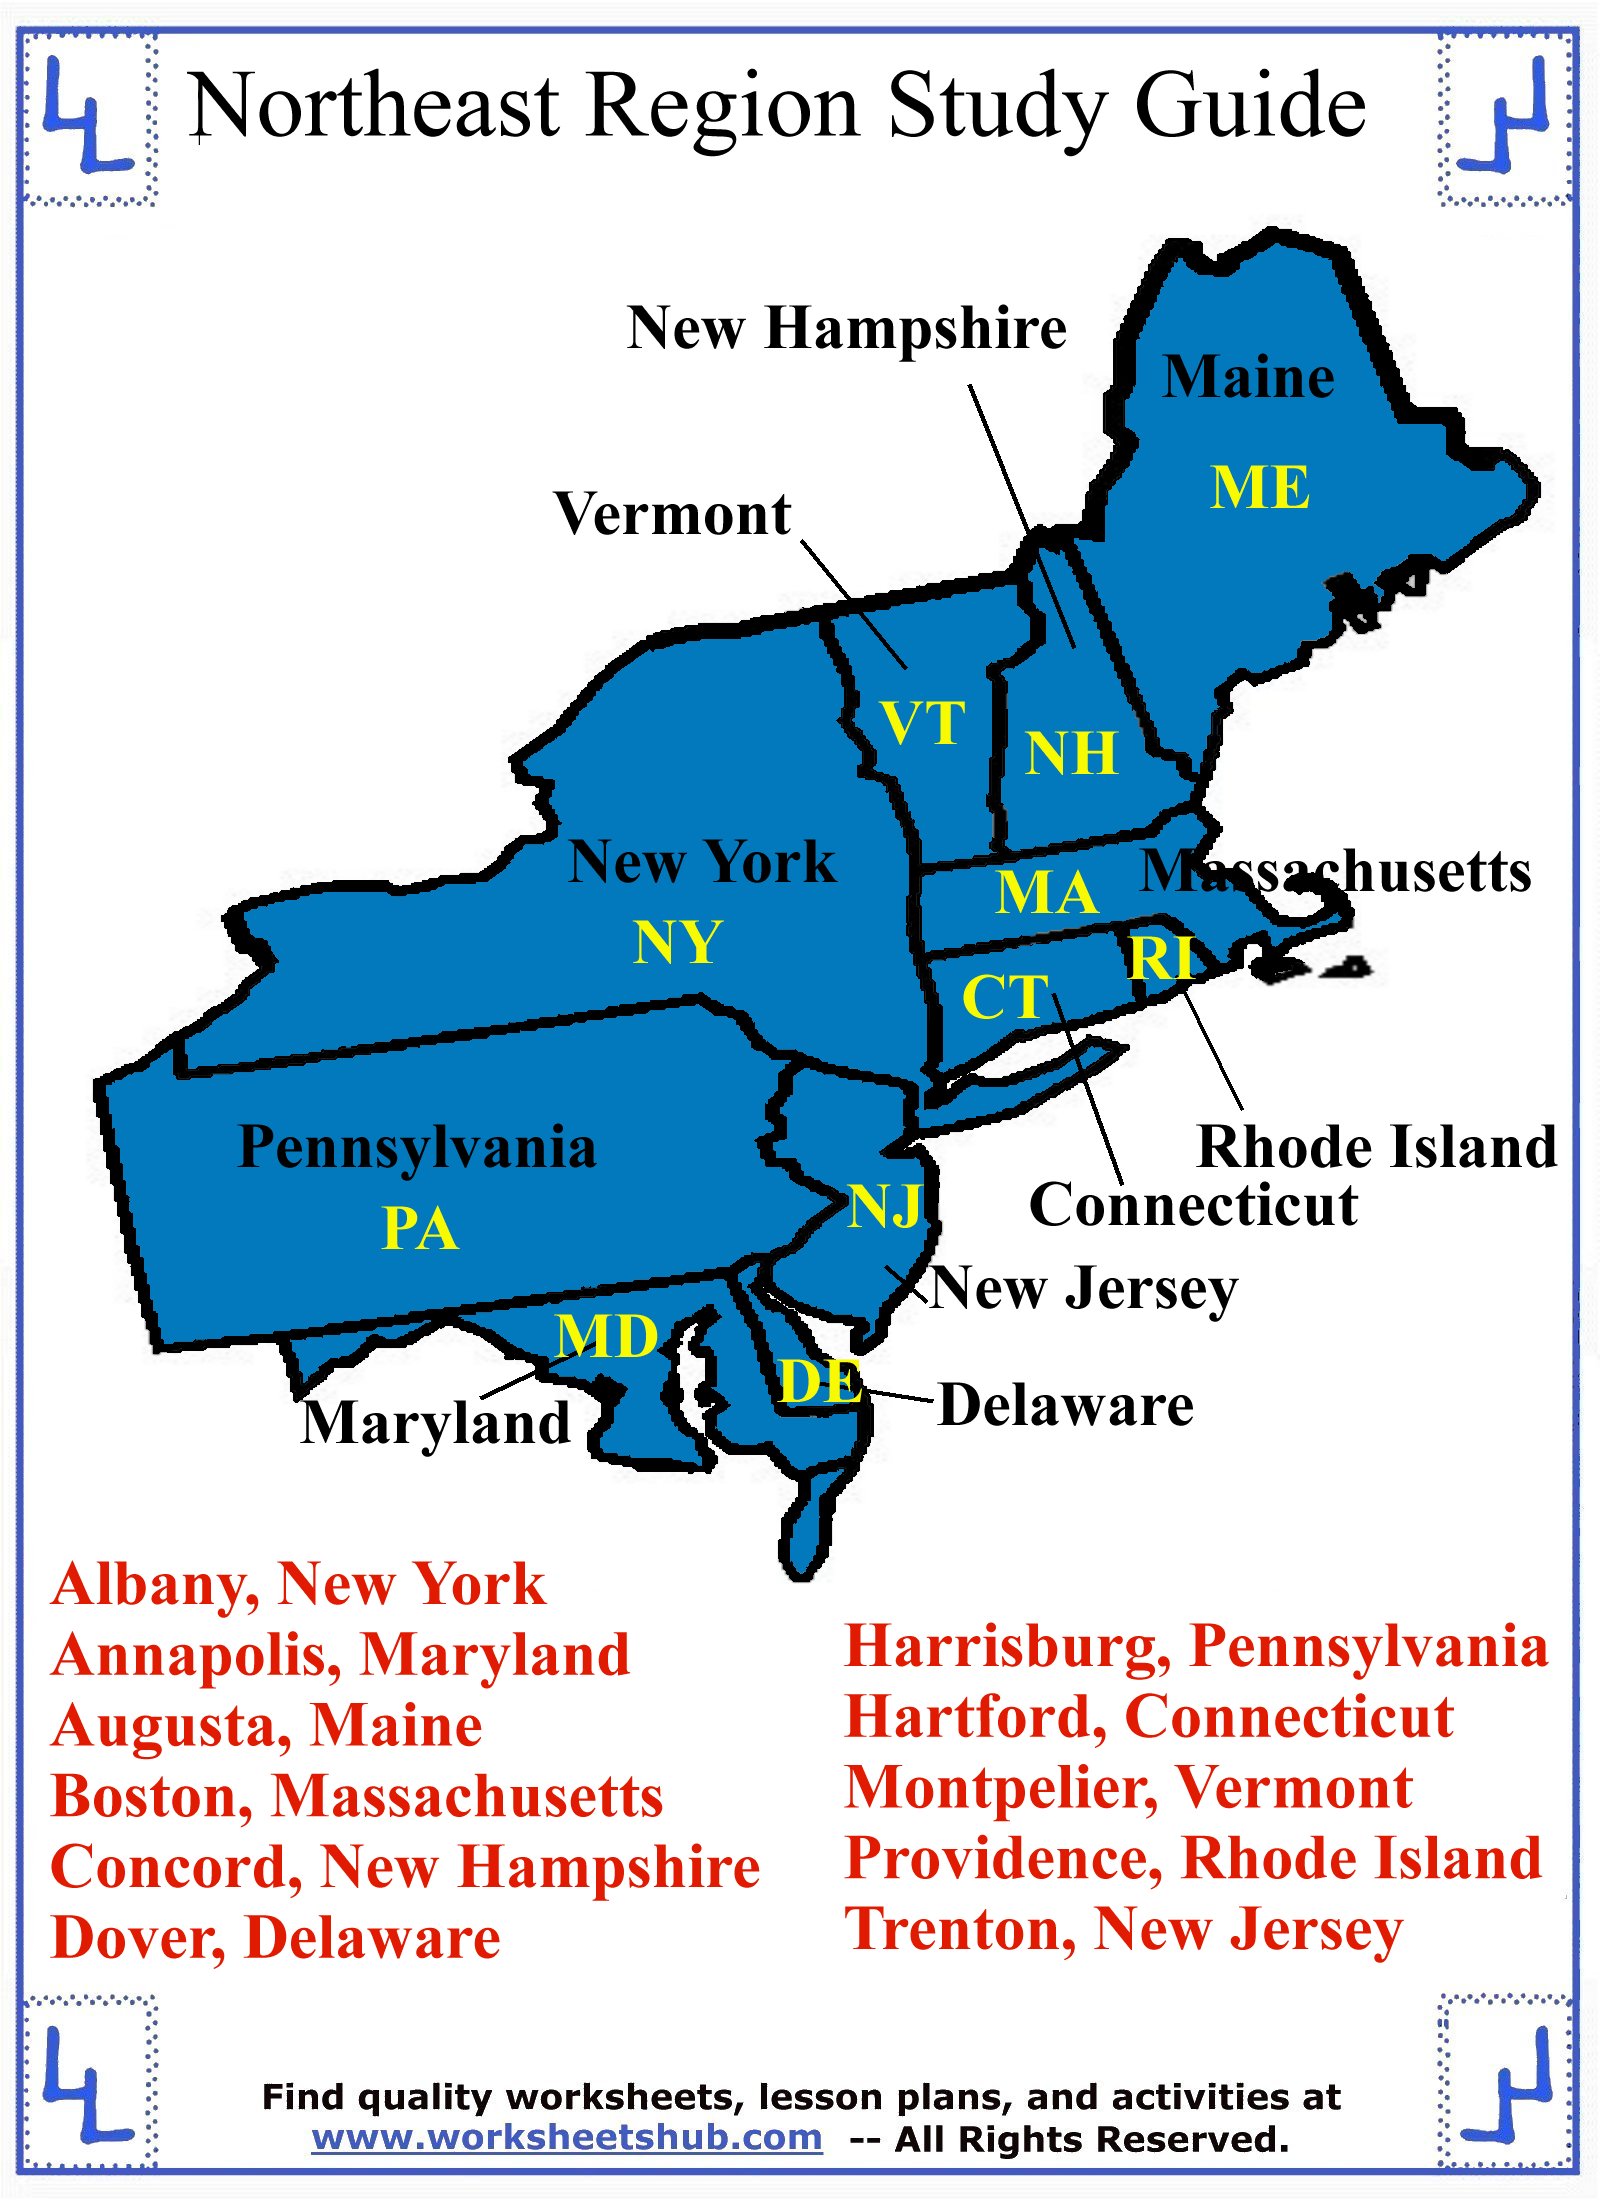 printable-map-of-the-northeast-region